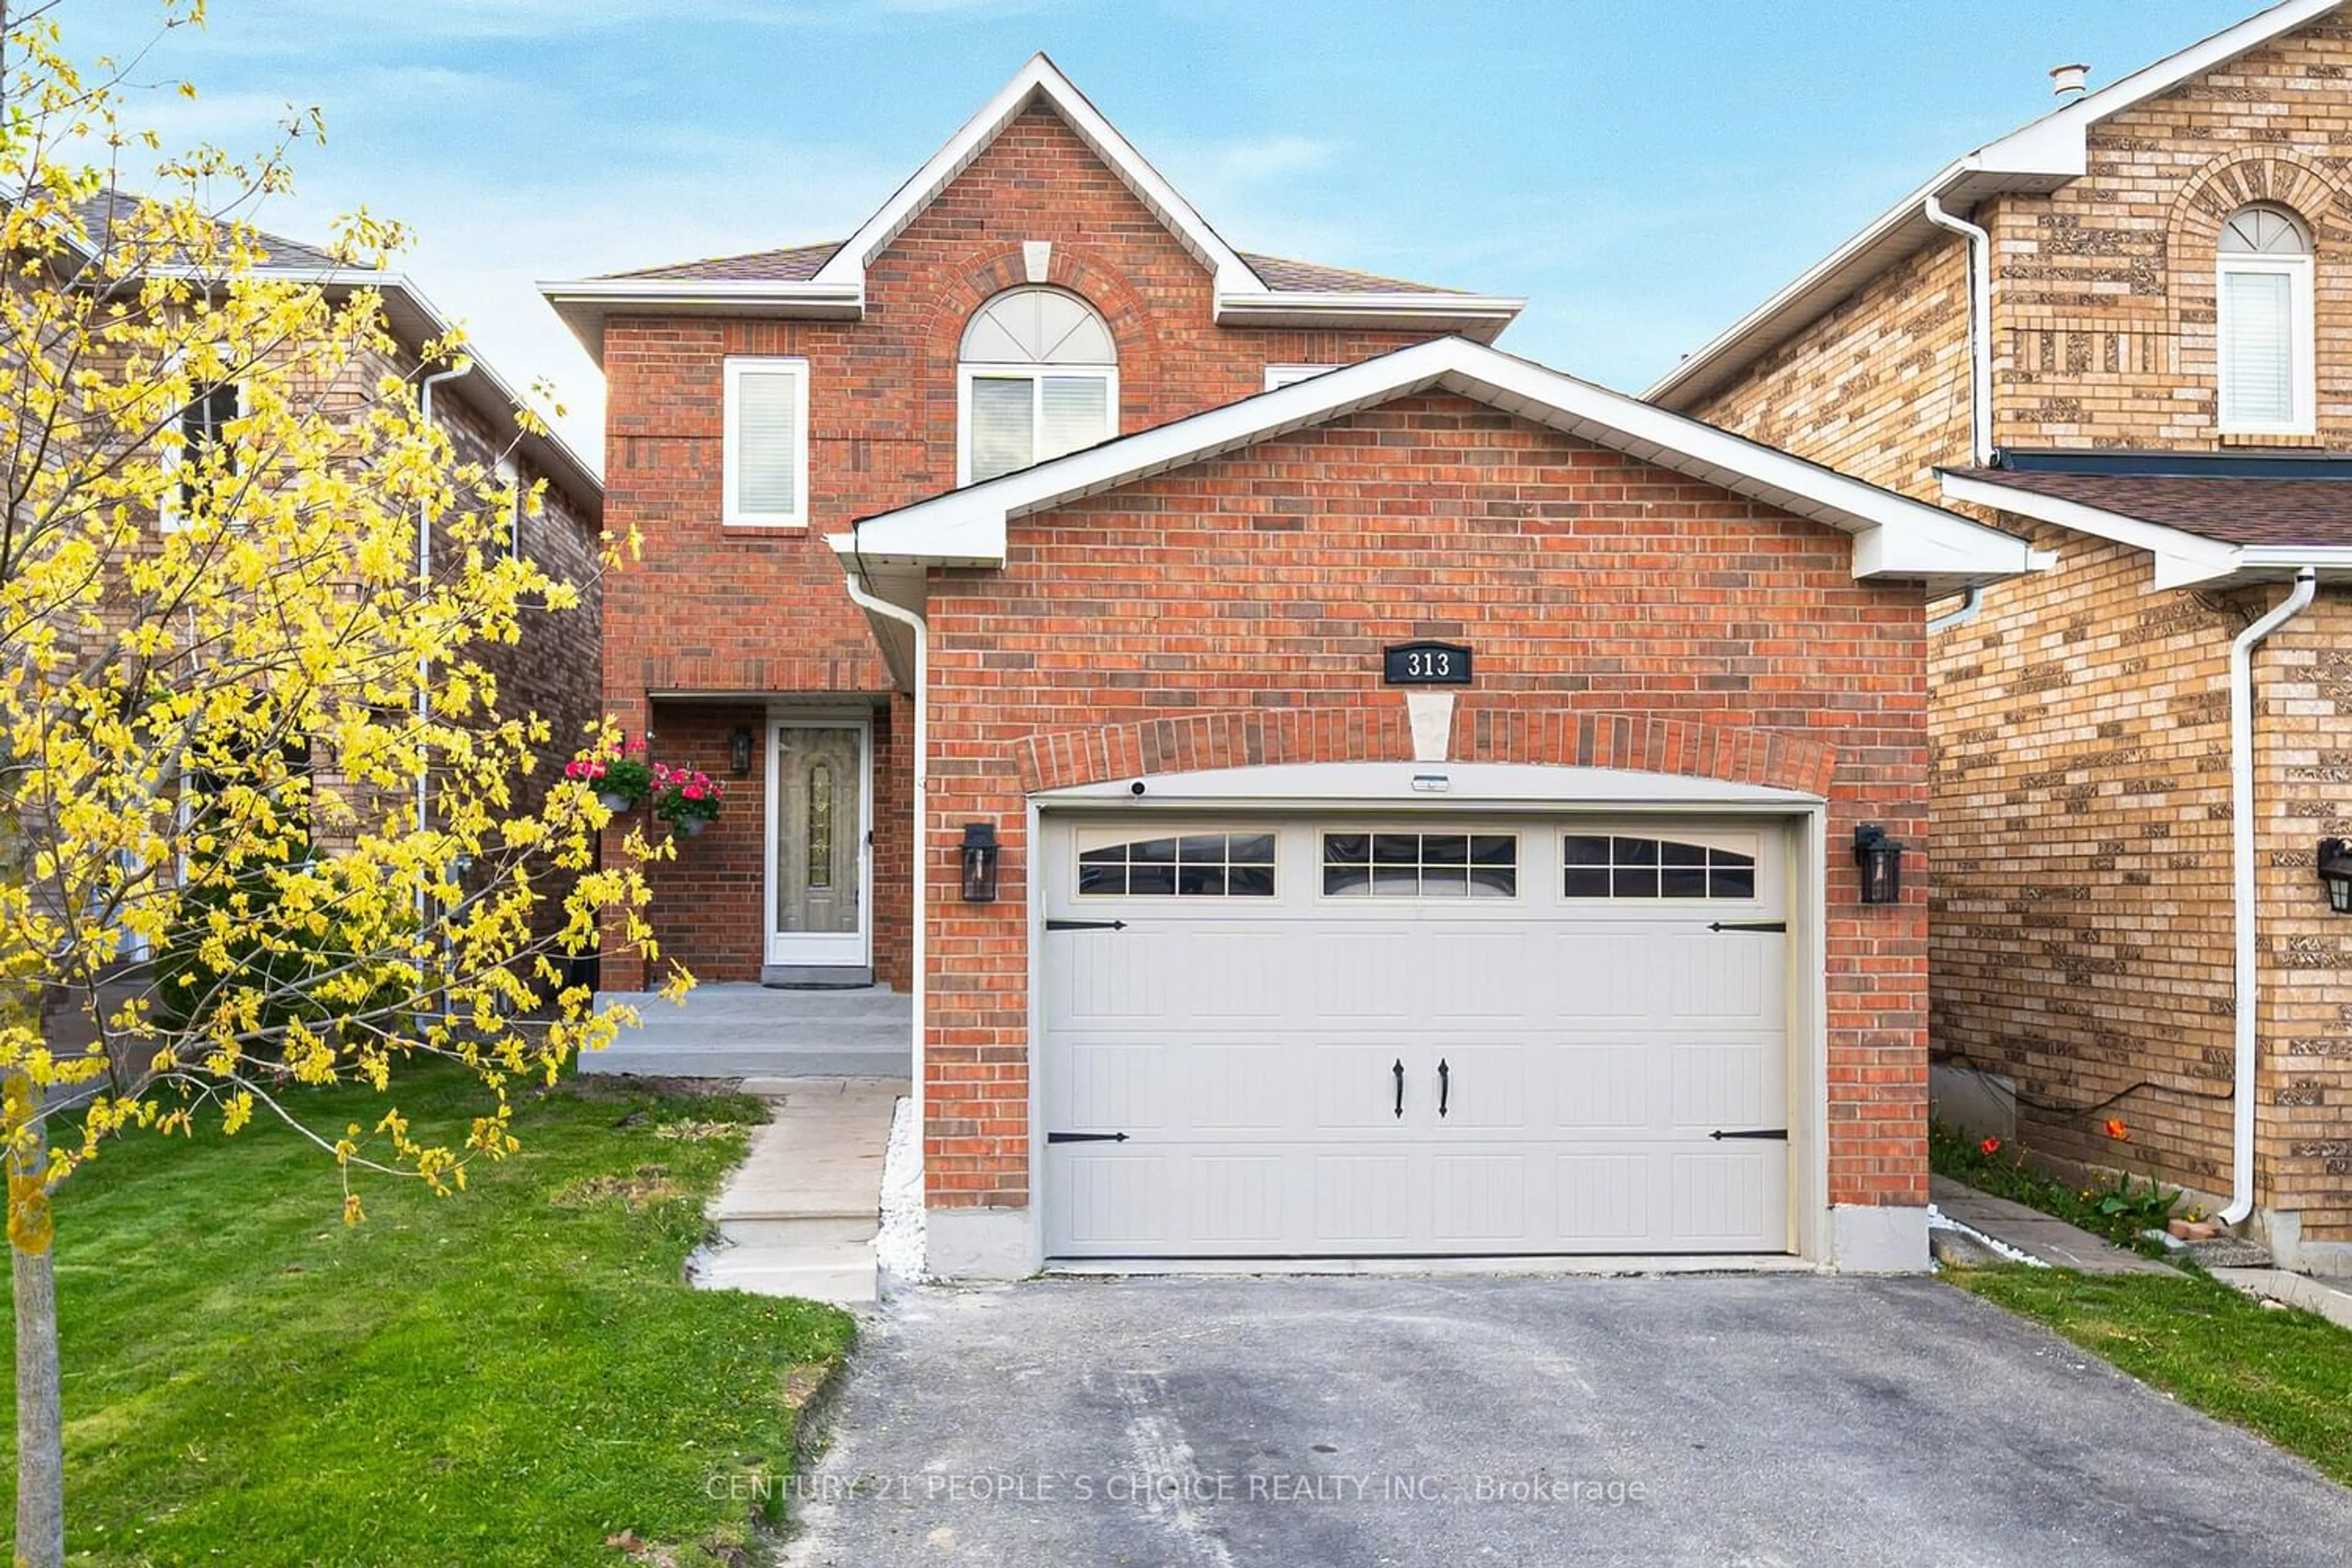 Home with brick exterior material for 313 Marshall Cres, Orangeville Ontario L9W 4Y5